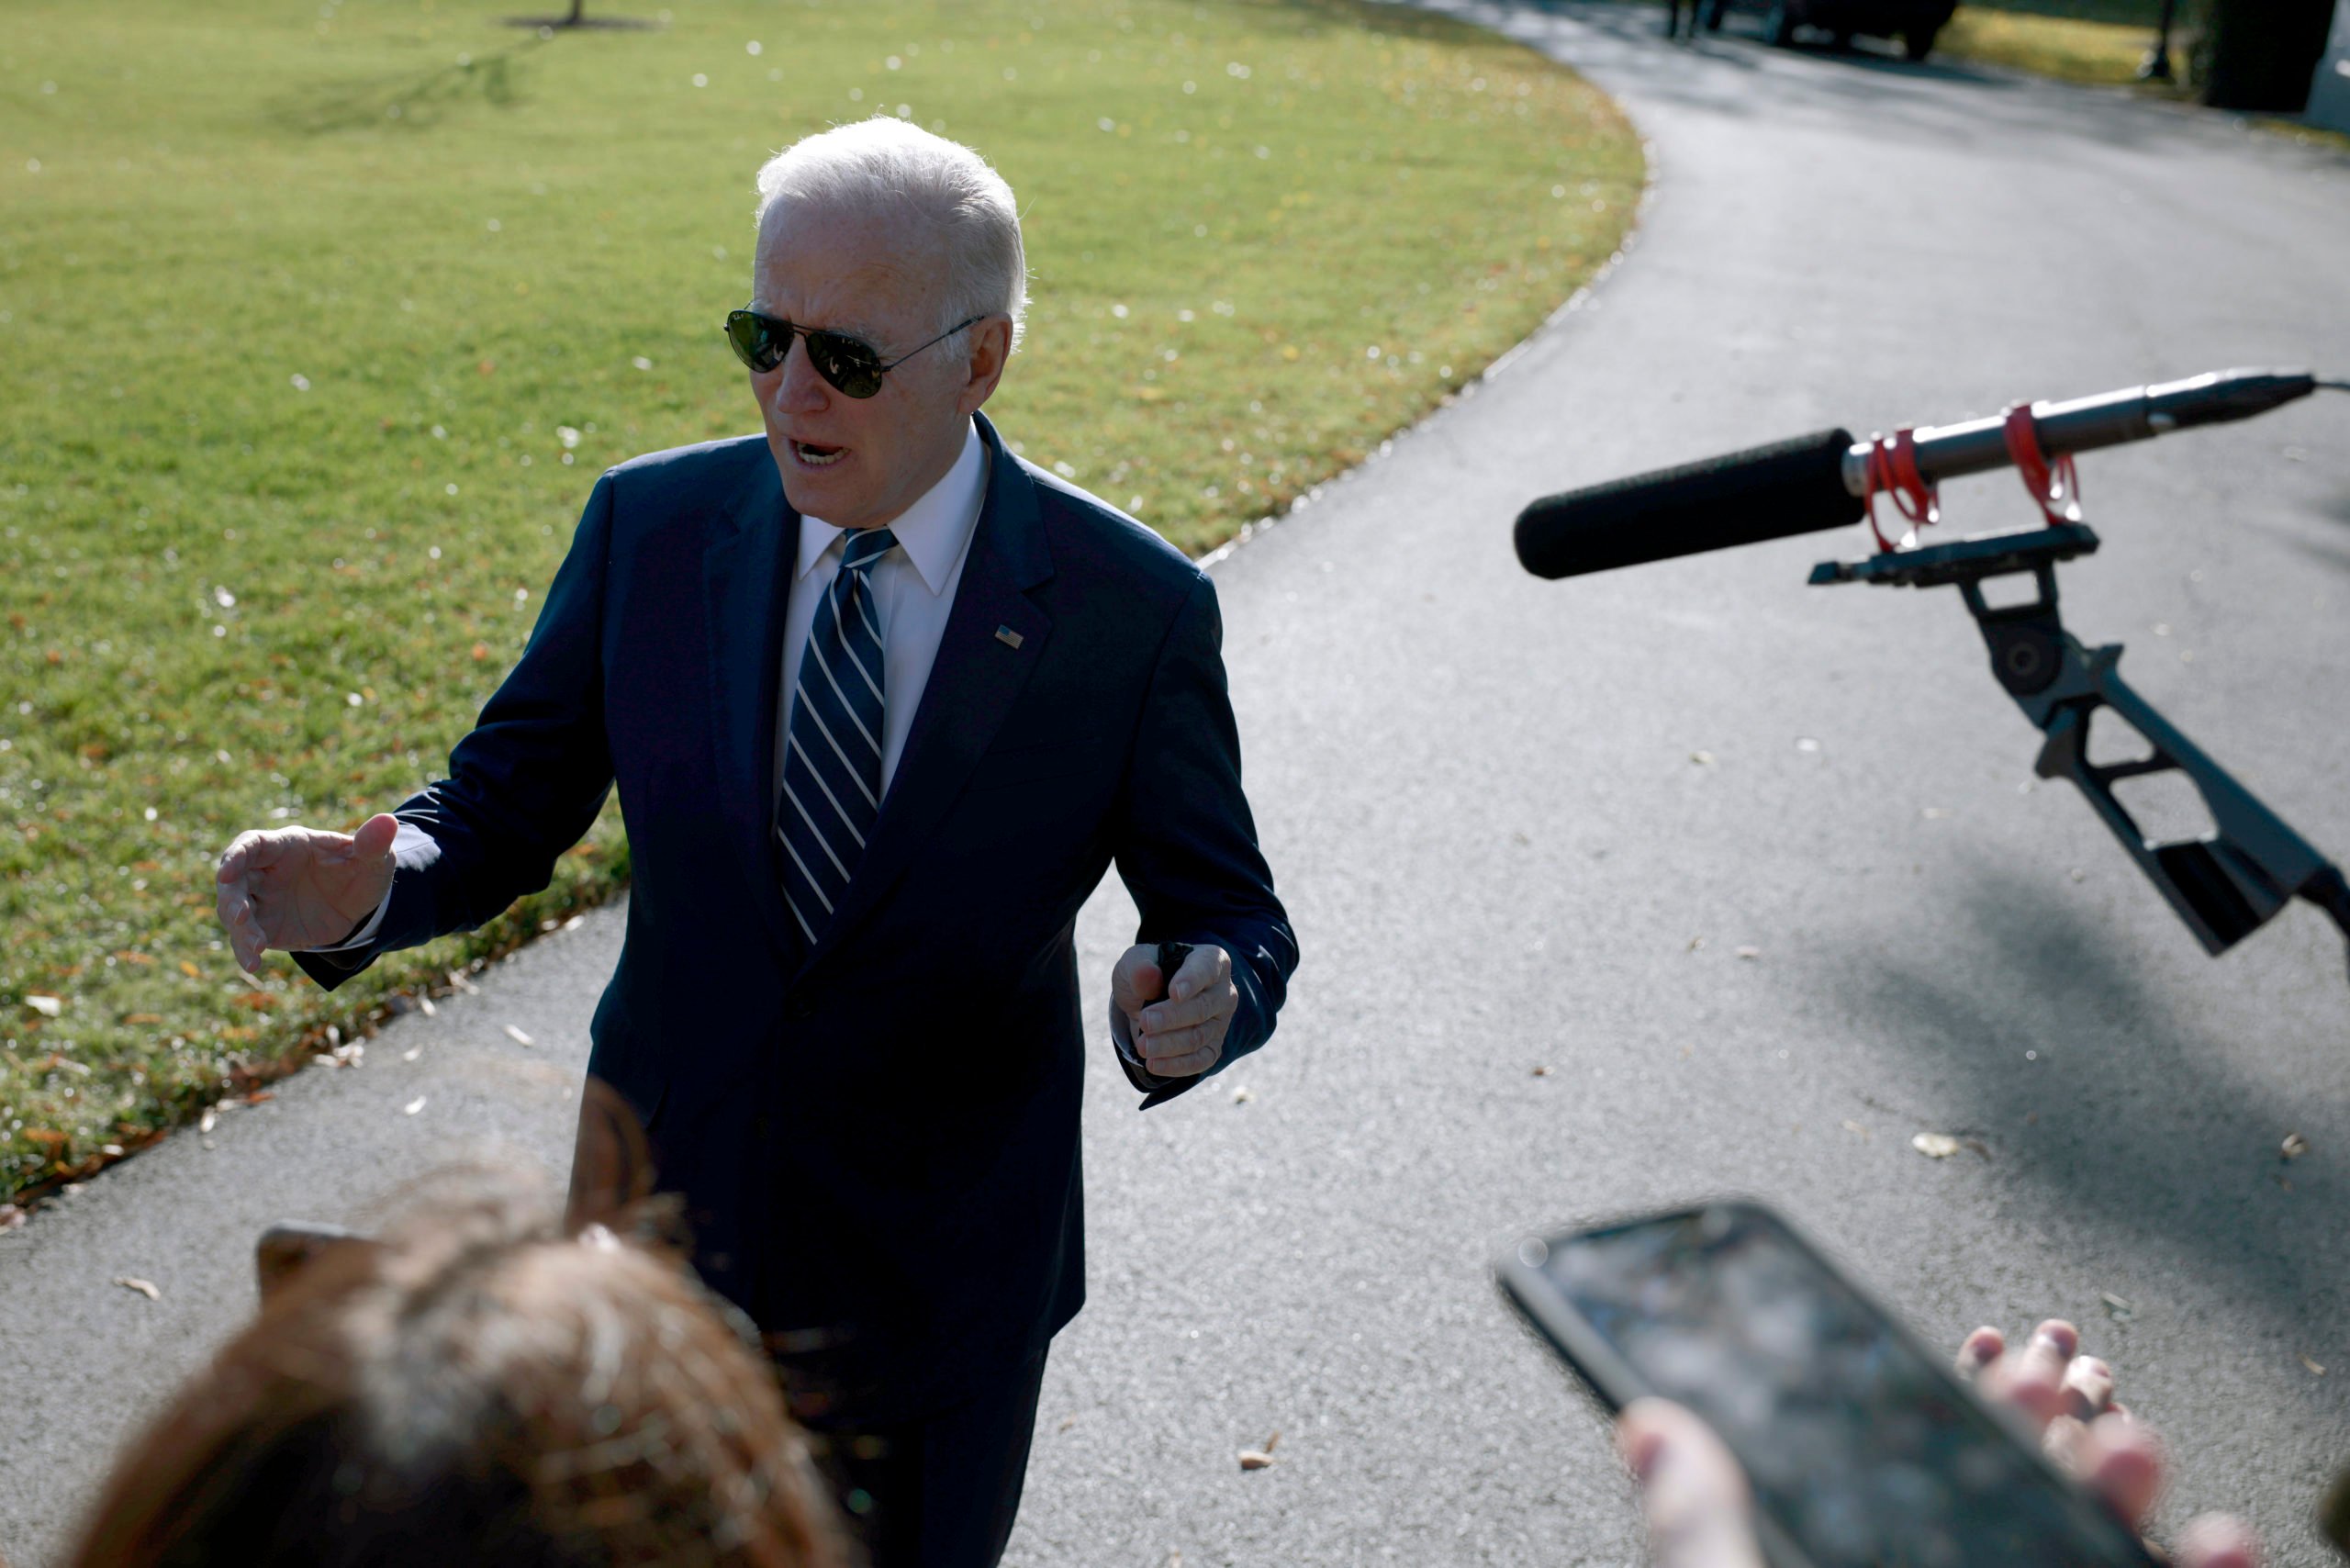 WASHINGTON, DC - NOVEMBER 19: U.S. President Joe Biden speaks to reporters after returning to the White House from Walter Reed Medical Center on November 19, 2021 in Washington, DC. Biden went to Walter Reed for a colonoscopy and medical check up . (Photo by Anna Moneymaker/Getty Images)